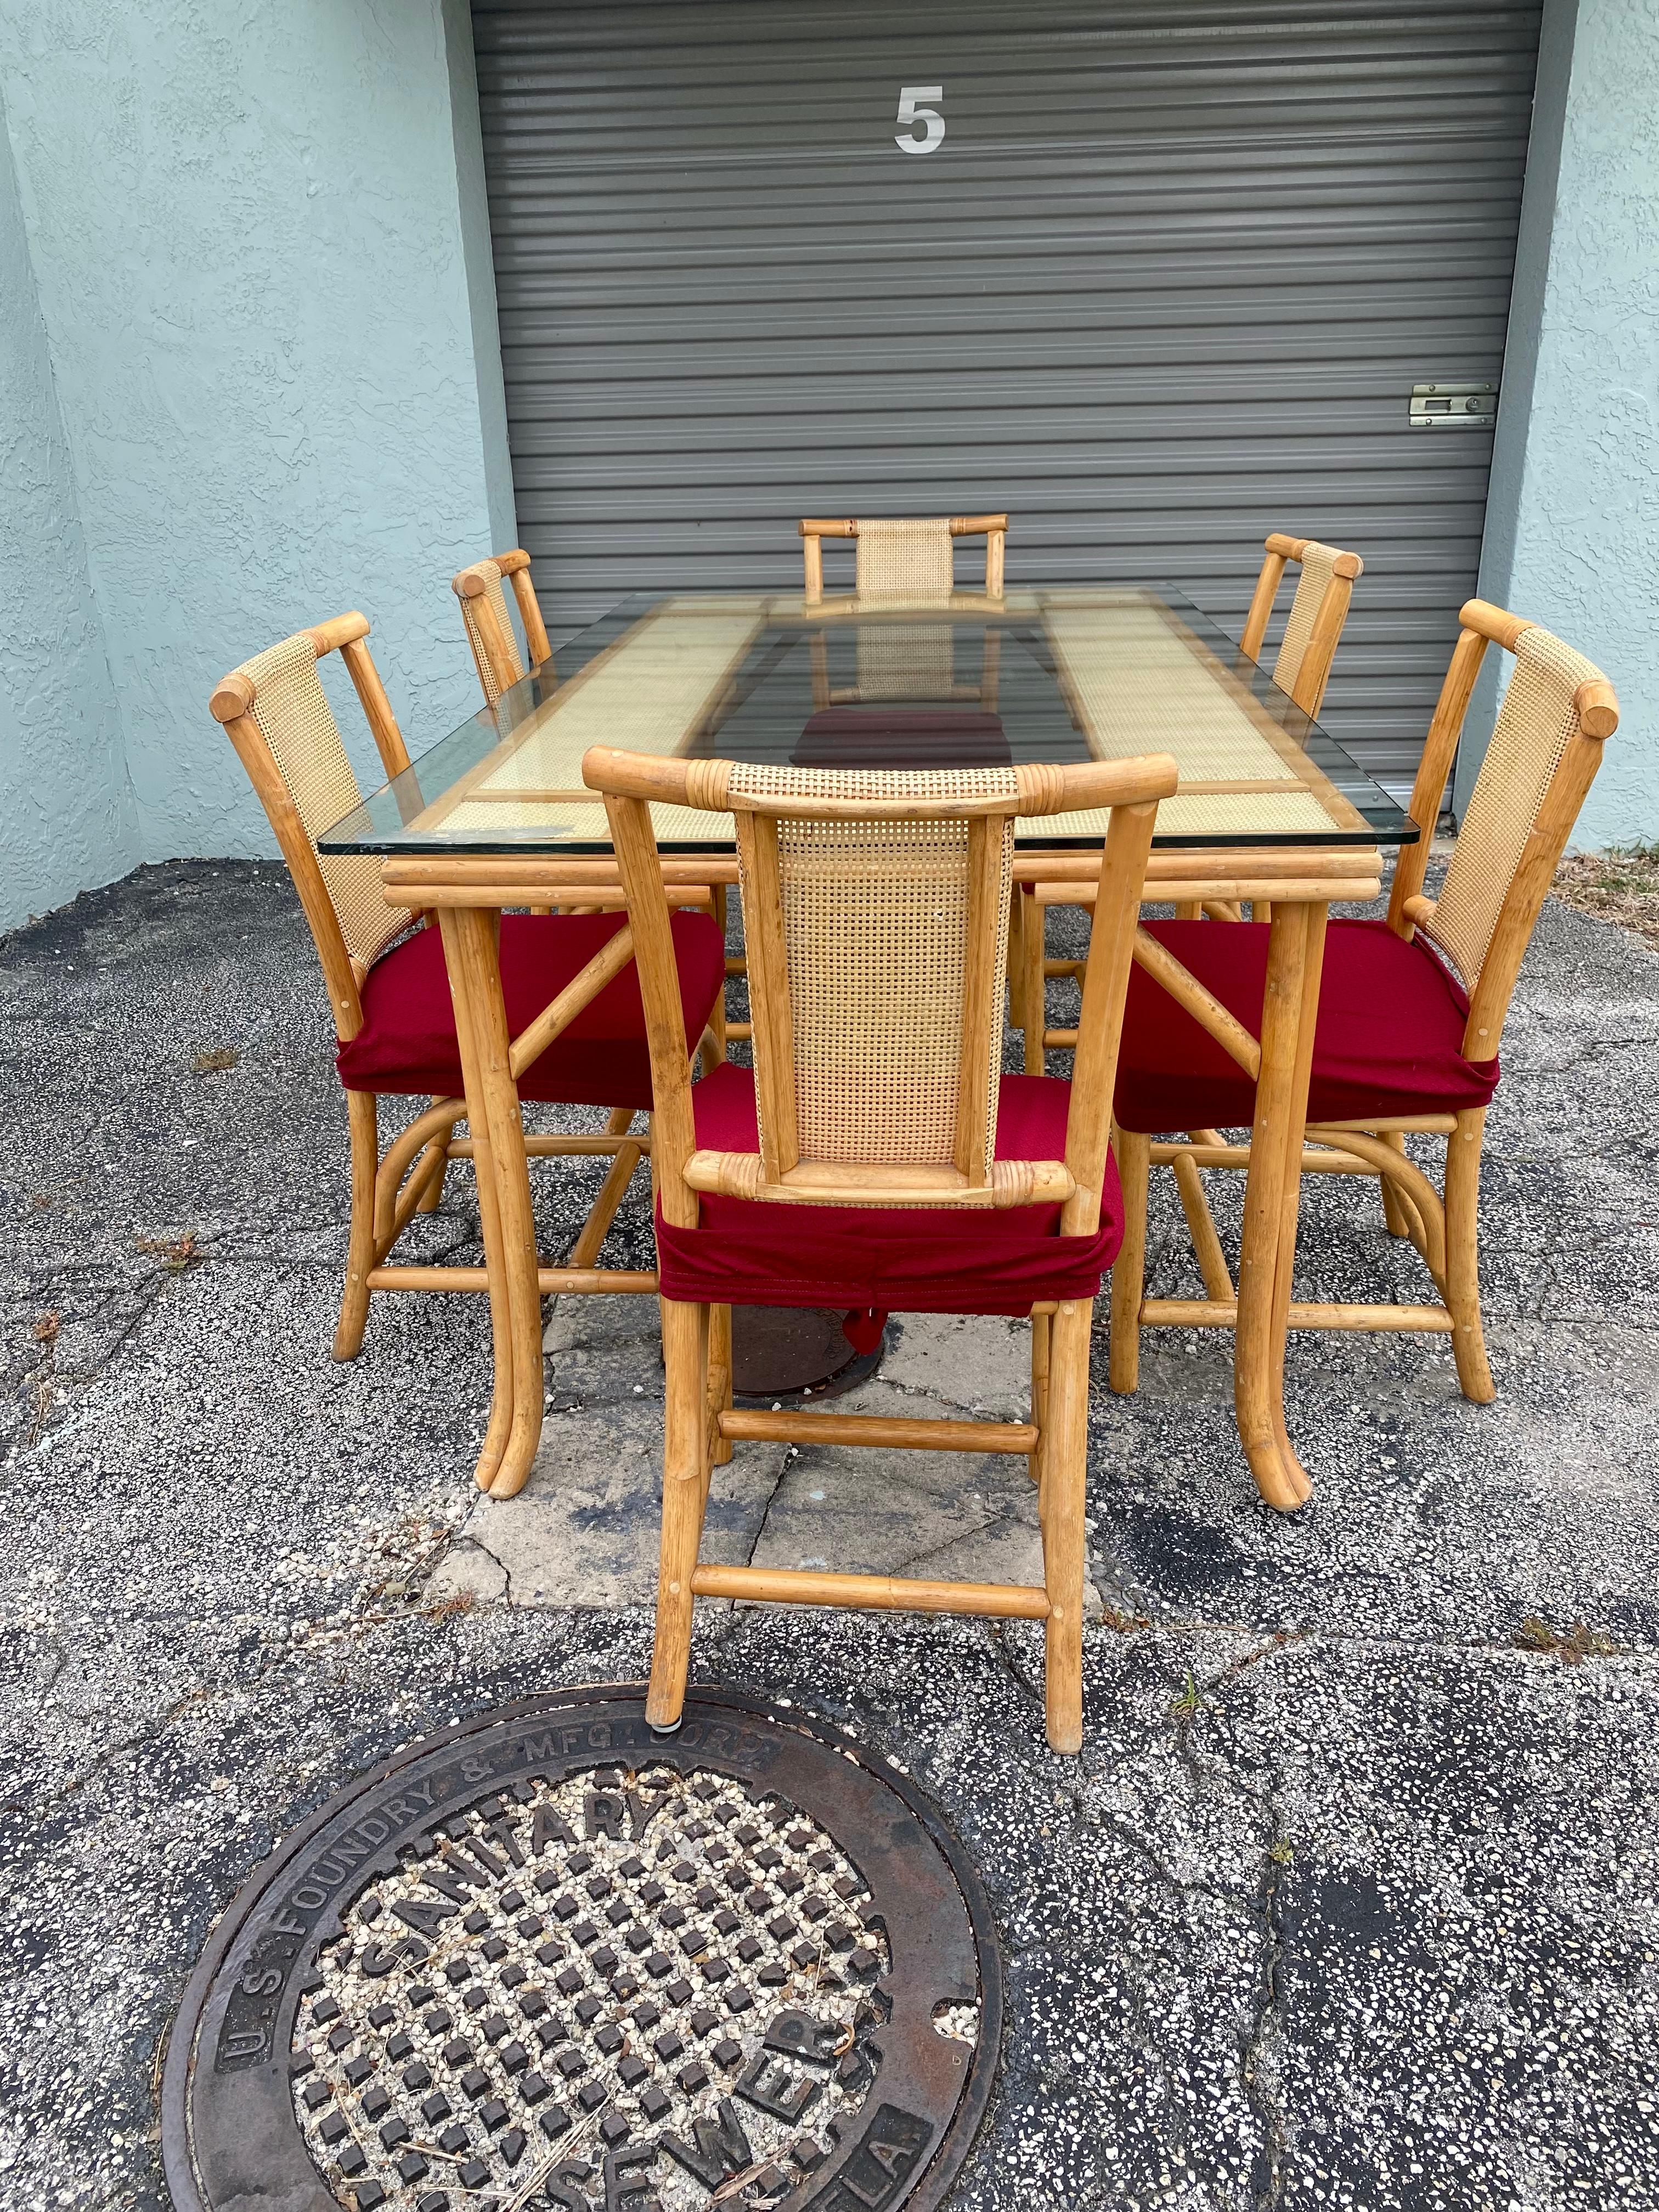 On offer on this occasion is one of the most stunning, dining set you could hope to find. This is an ultra-rare opportunity to acquire what is, unequivocally, the best of the best, it being a most spectacular and beautifully-presented rattan table